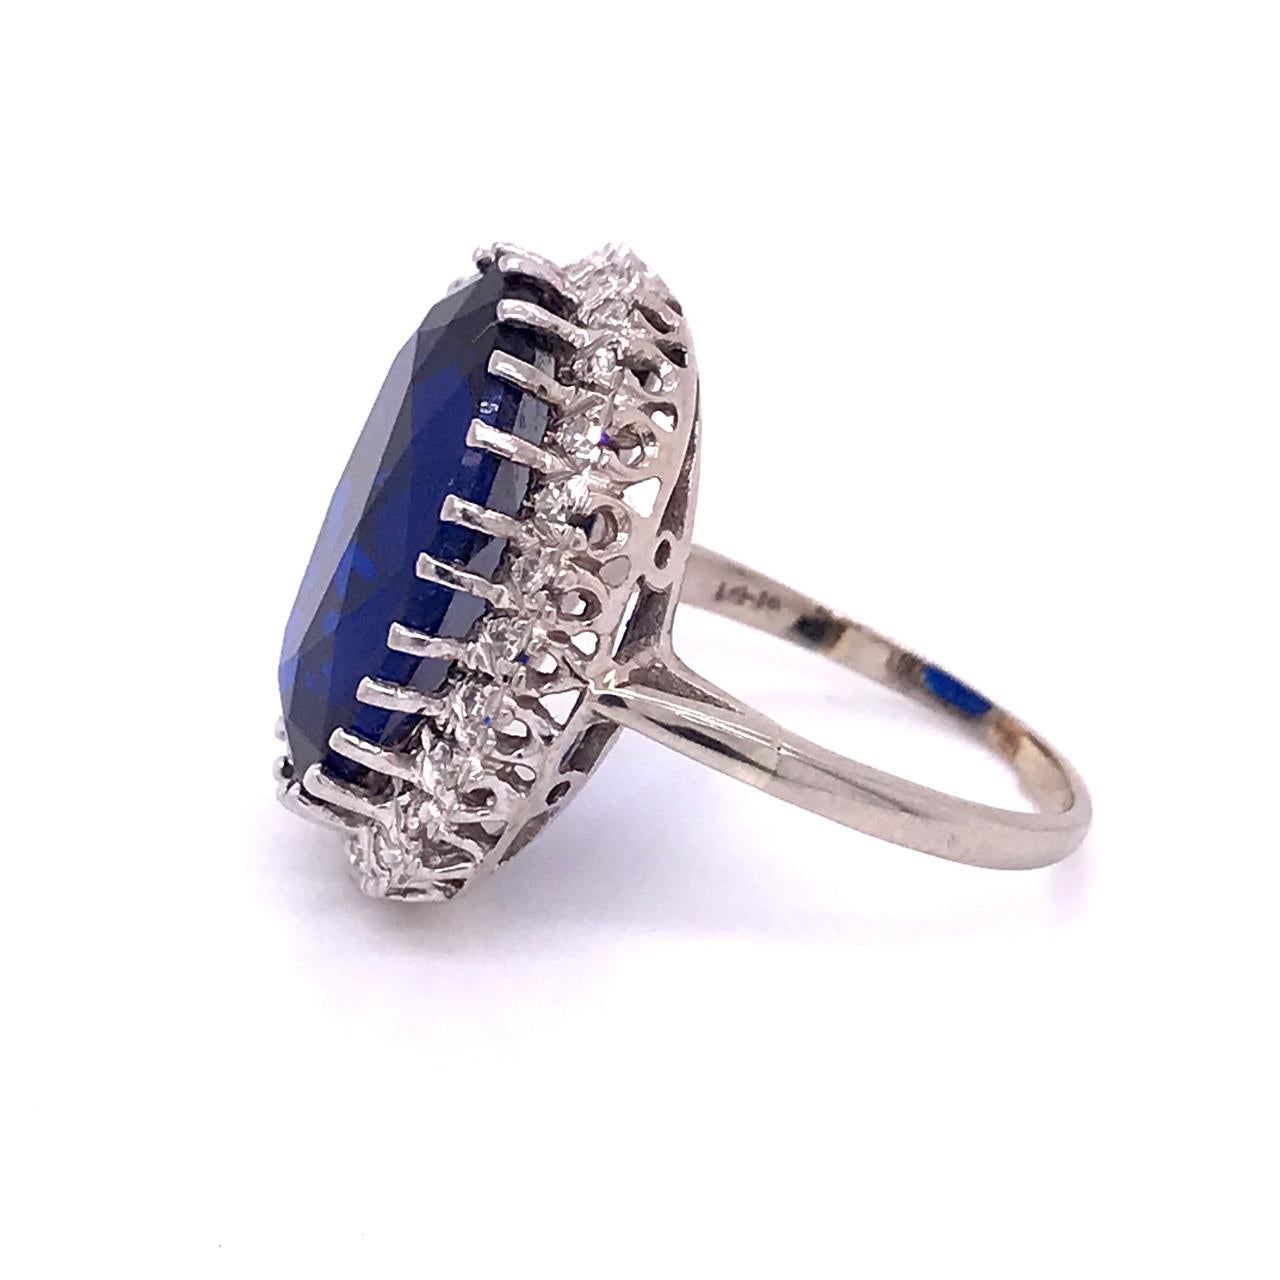 Women's 14 Karat White Gold, Diamond, and Large Blue Topaz Cocktail Ring For Sale